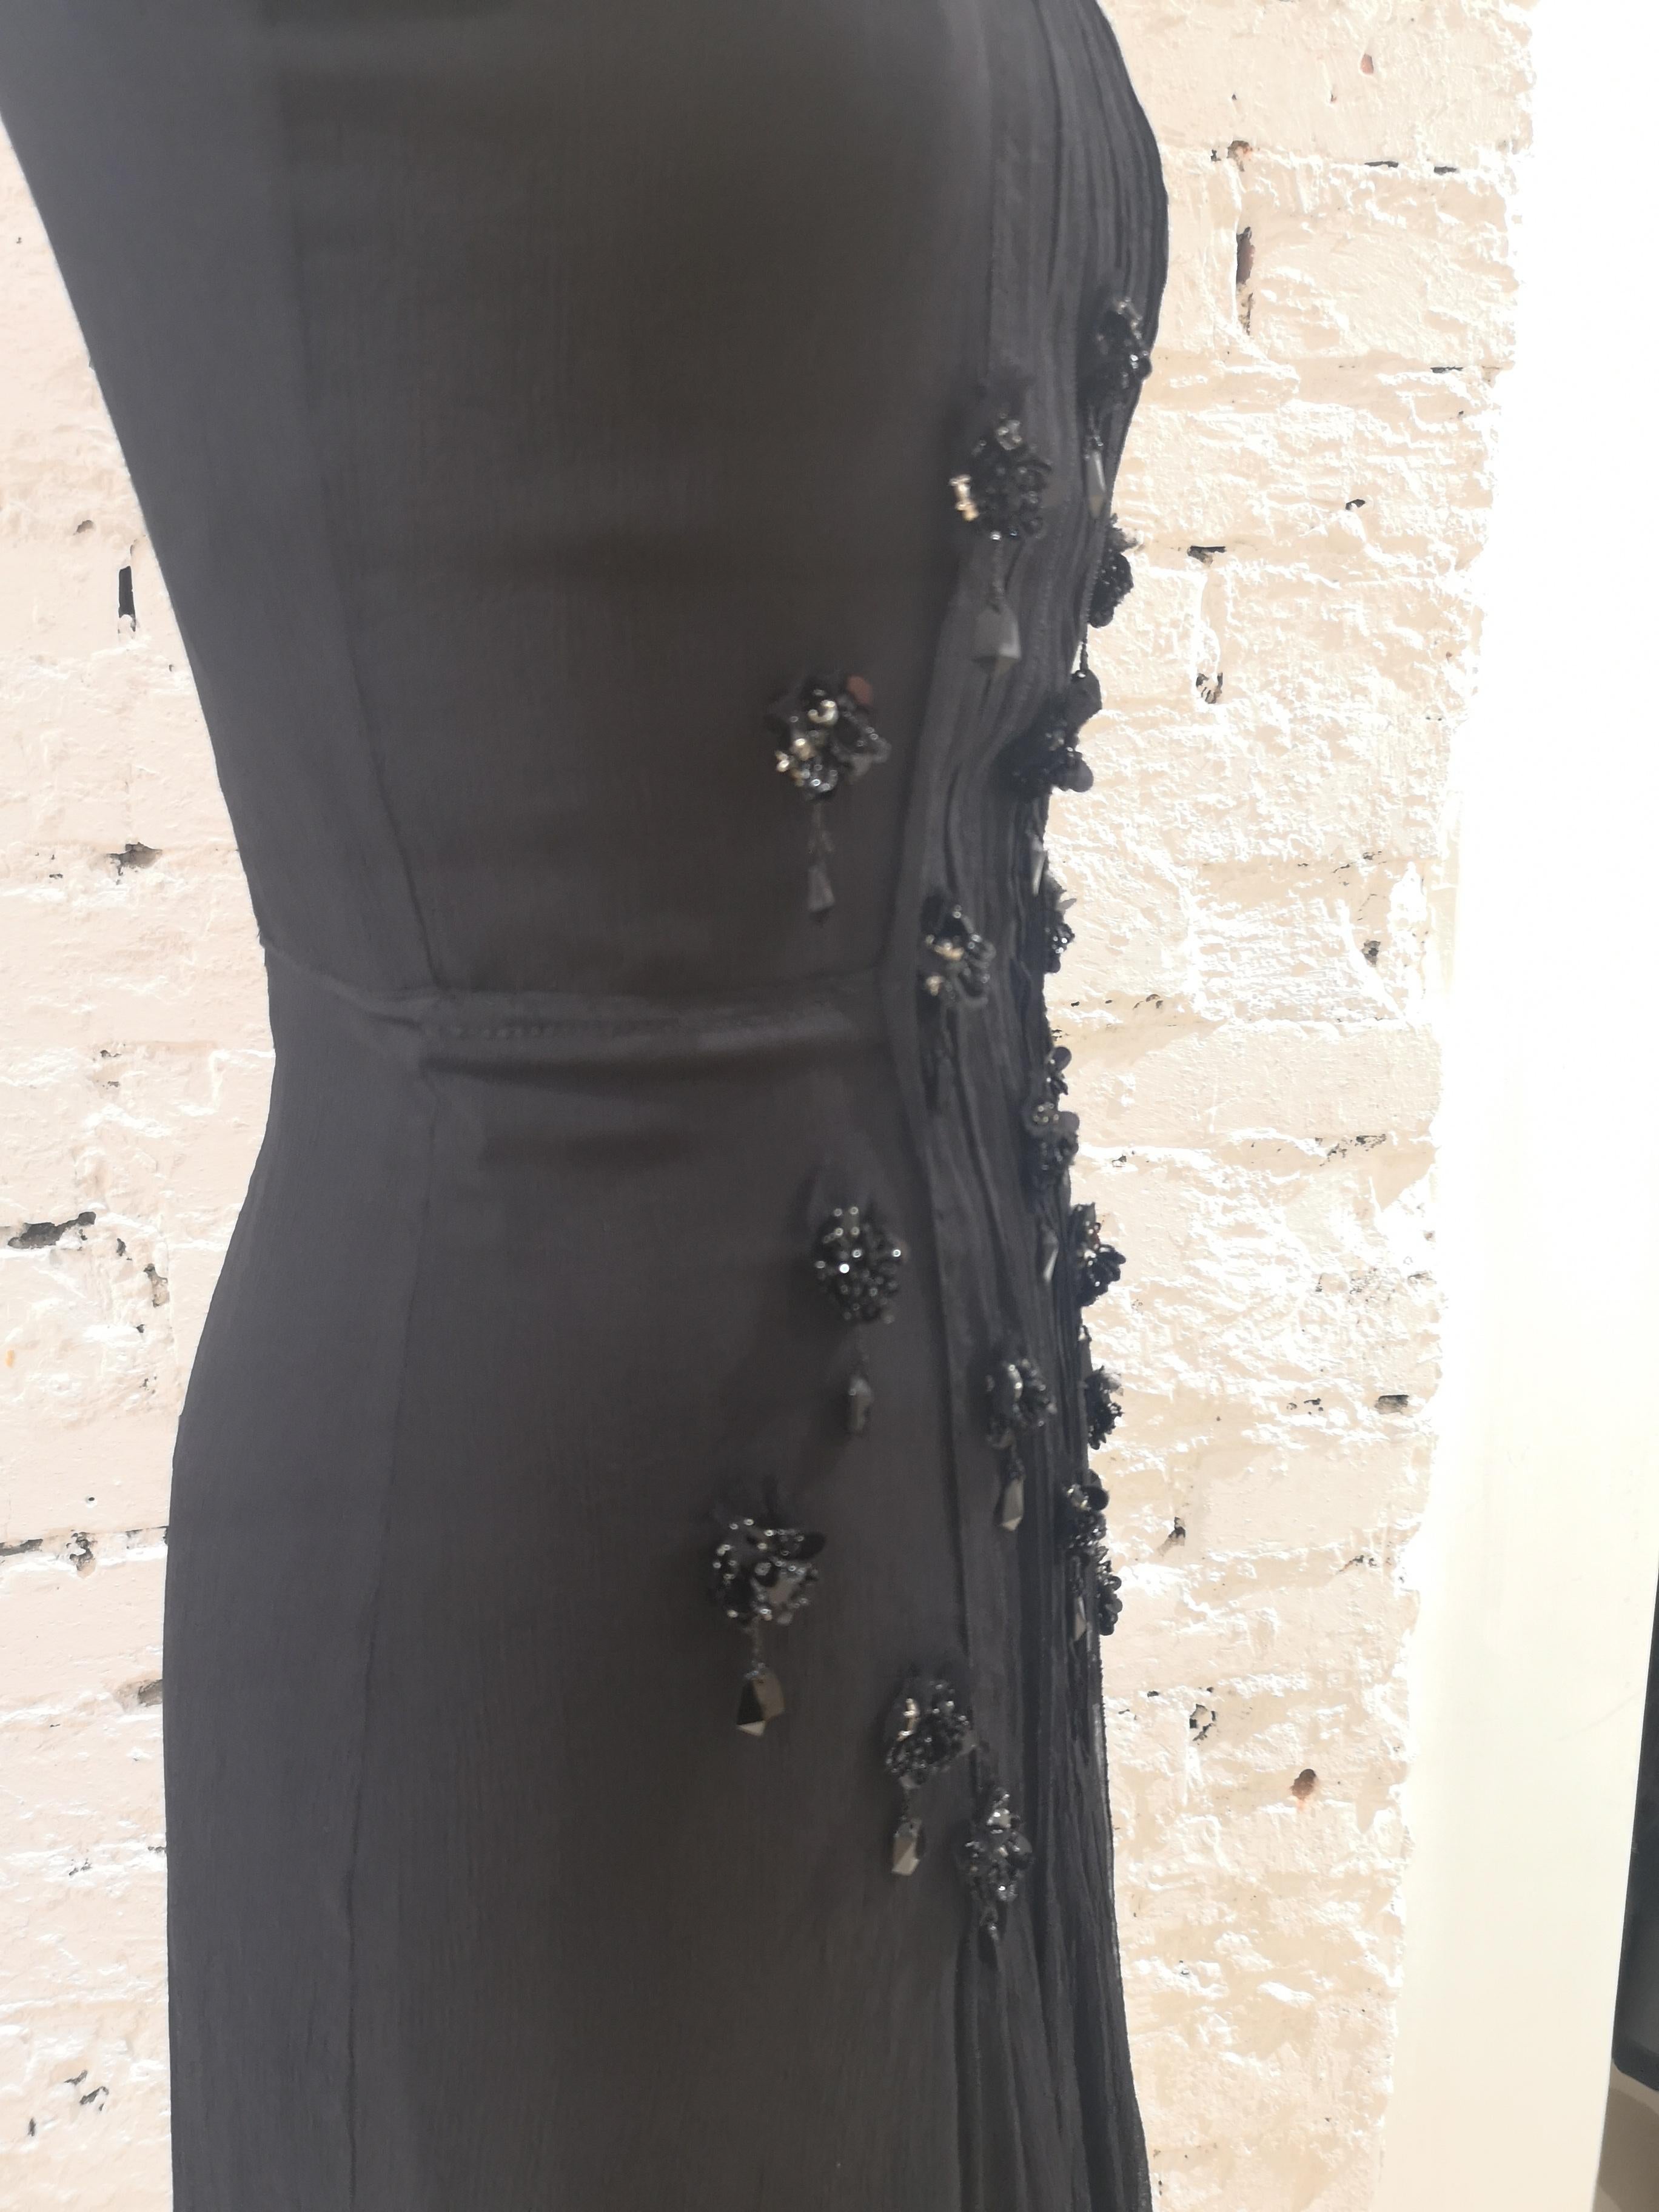 Prada Black silk with swarovsky stones Dress
PRada black dress embellished with black swarovski studs on the front and all around the neck
size S 